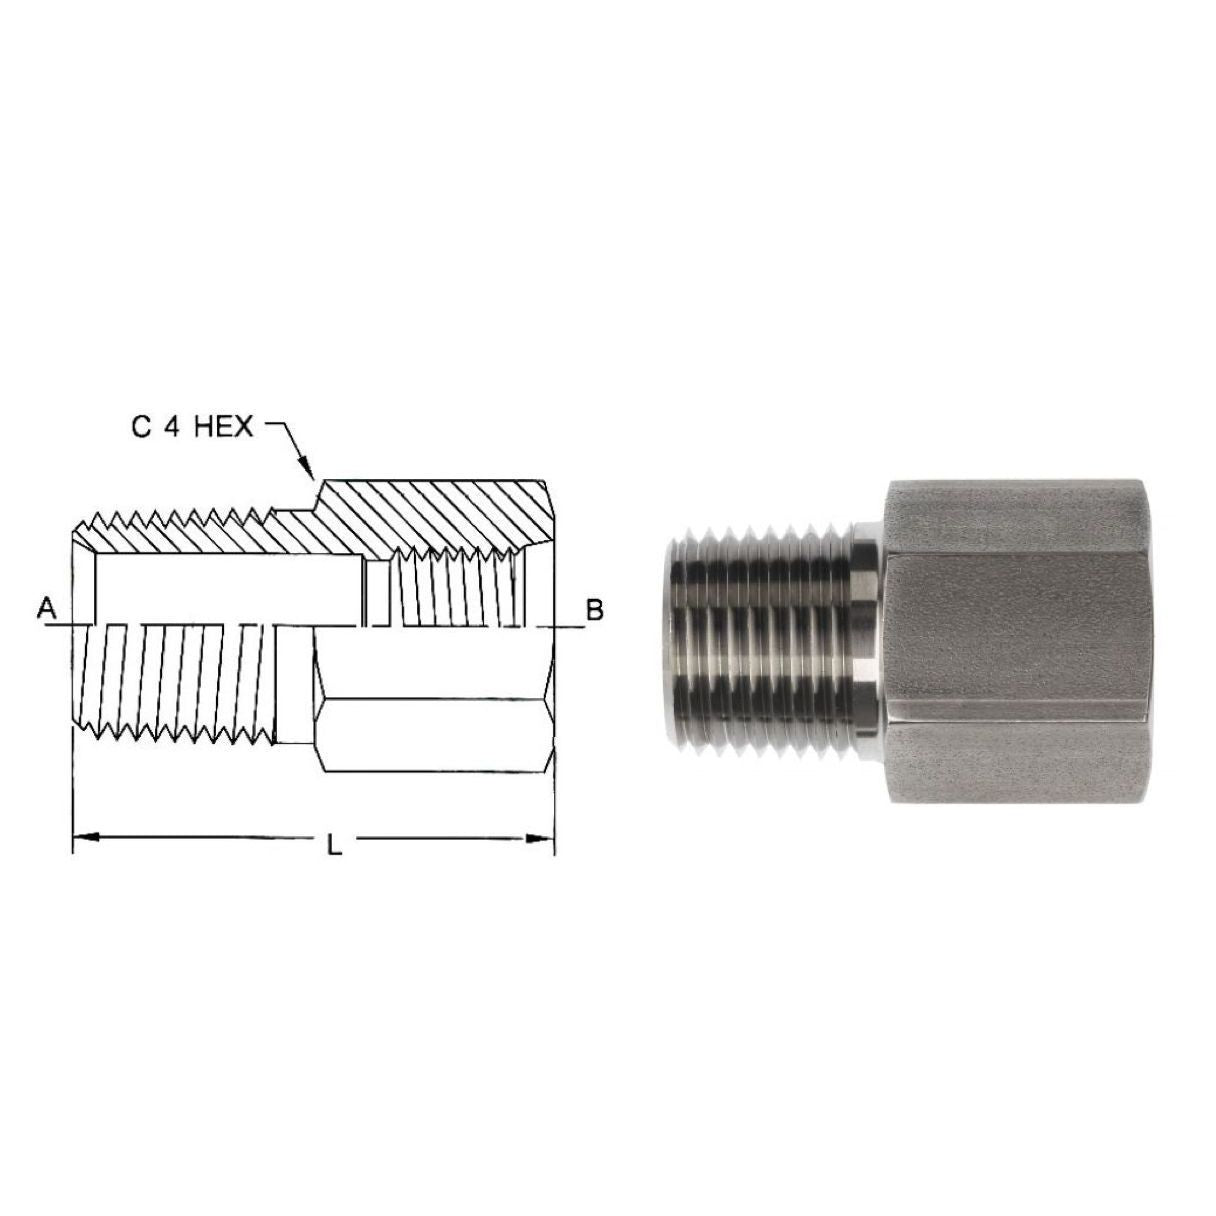 6404-10-06 : OneHydraulics Adapter, Straight, 0.625 (5/8") Female ORB x 0.375 (3/8") Male, Steel, 4500psi